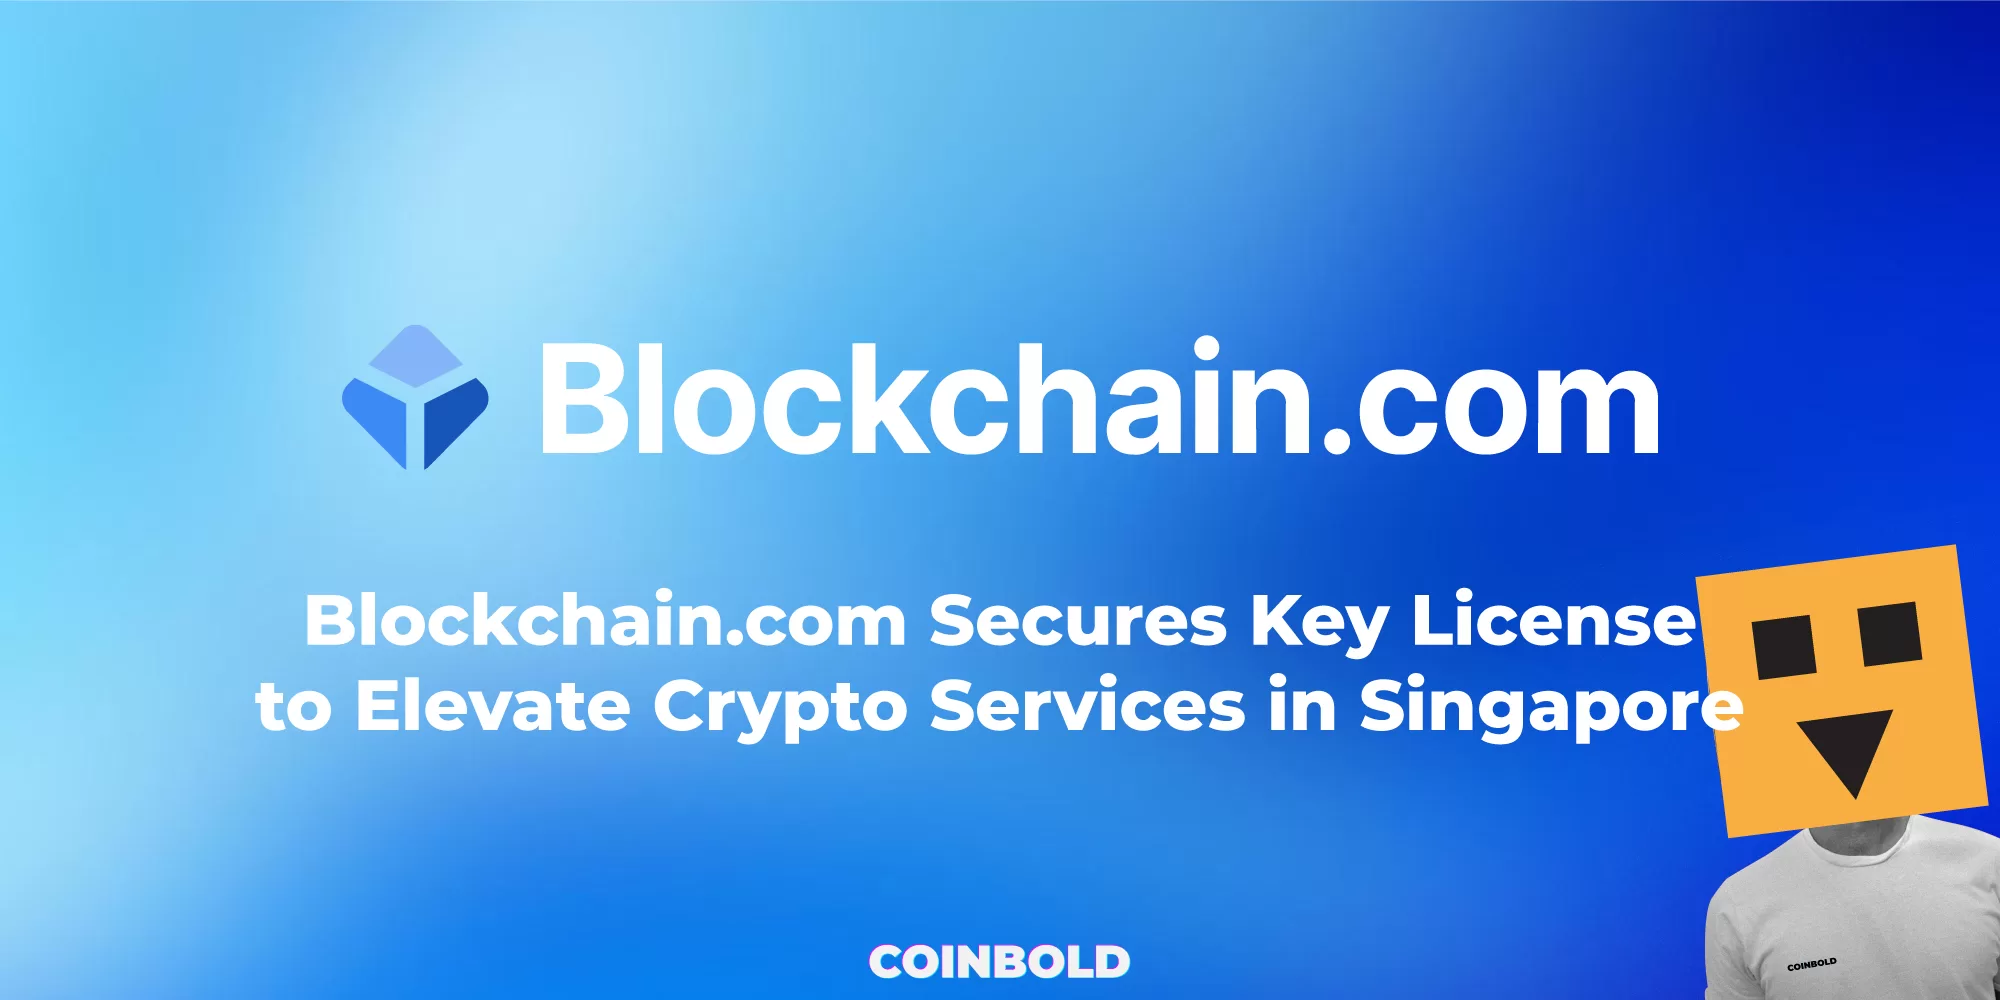 Blockchain.com Secures Key License to Elevate Crypto Services in Singapore